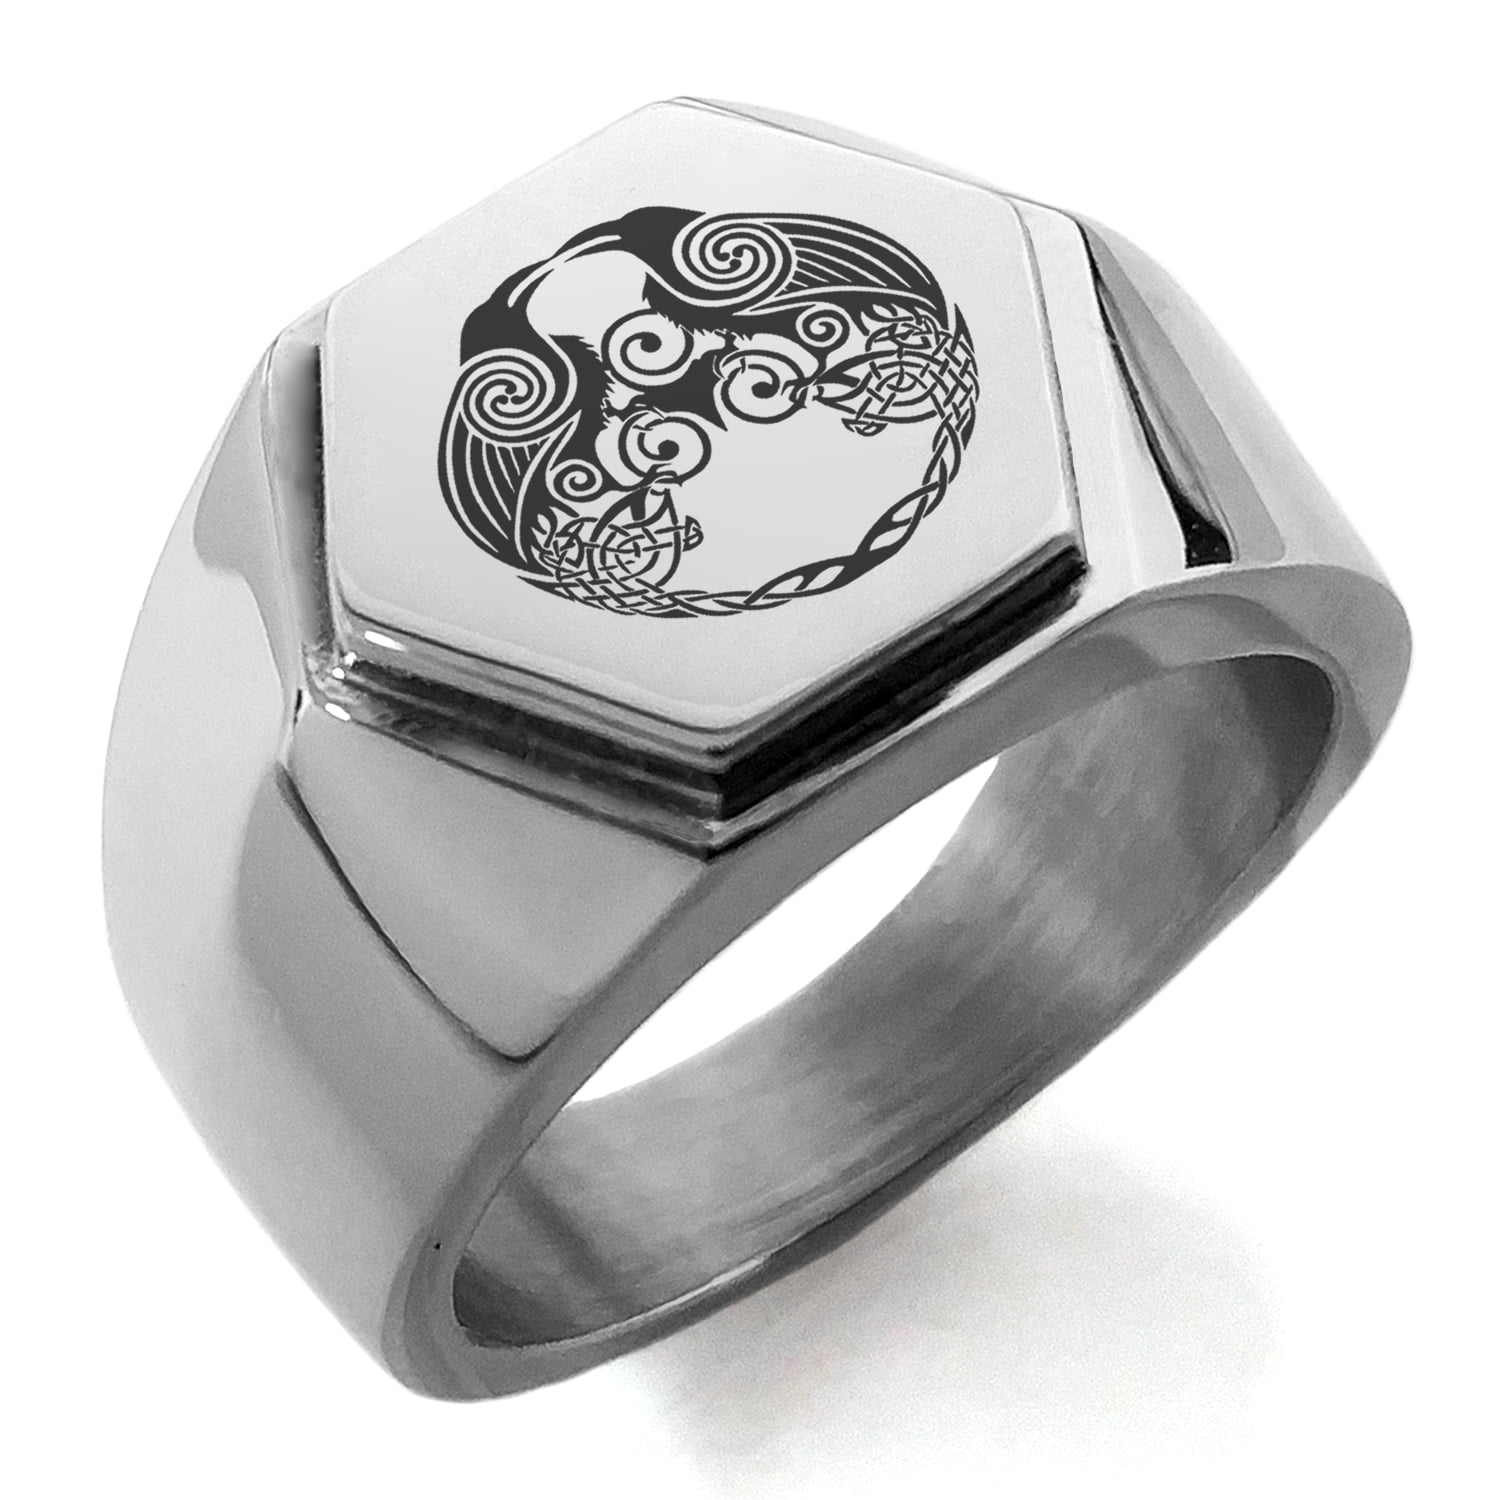 Double Ring with Two Ravens Huginn and Muninn Ring